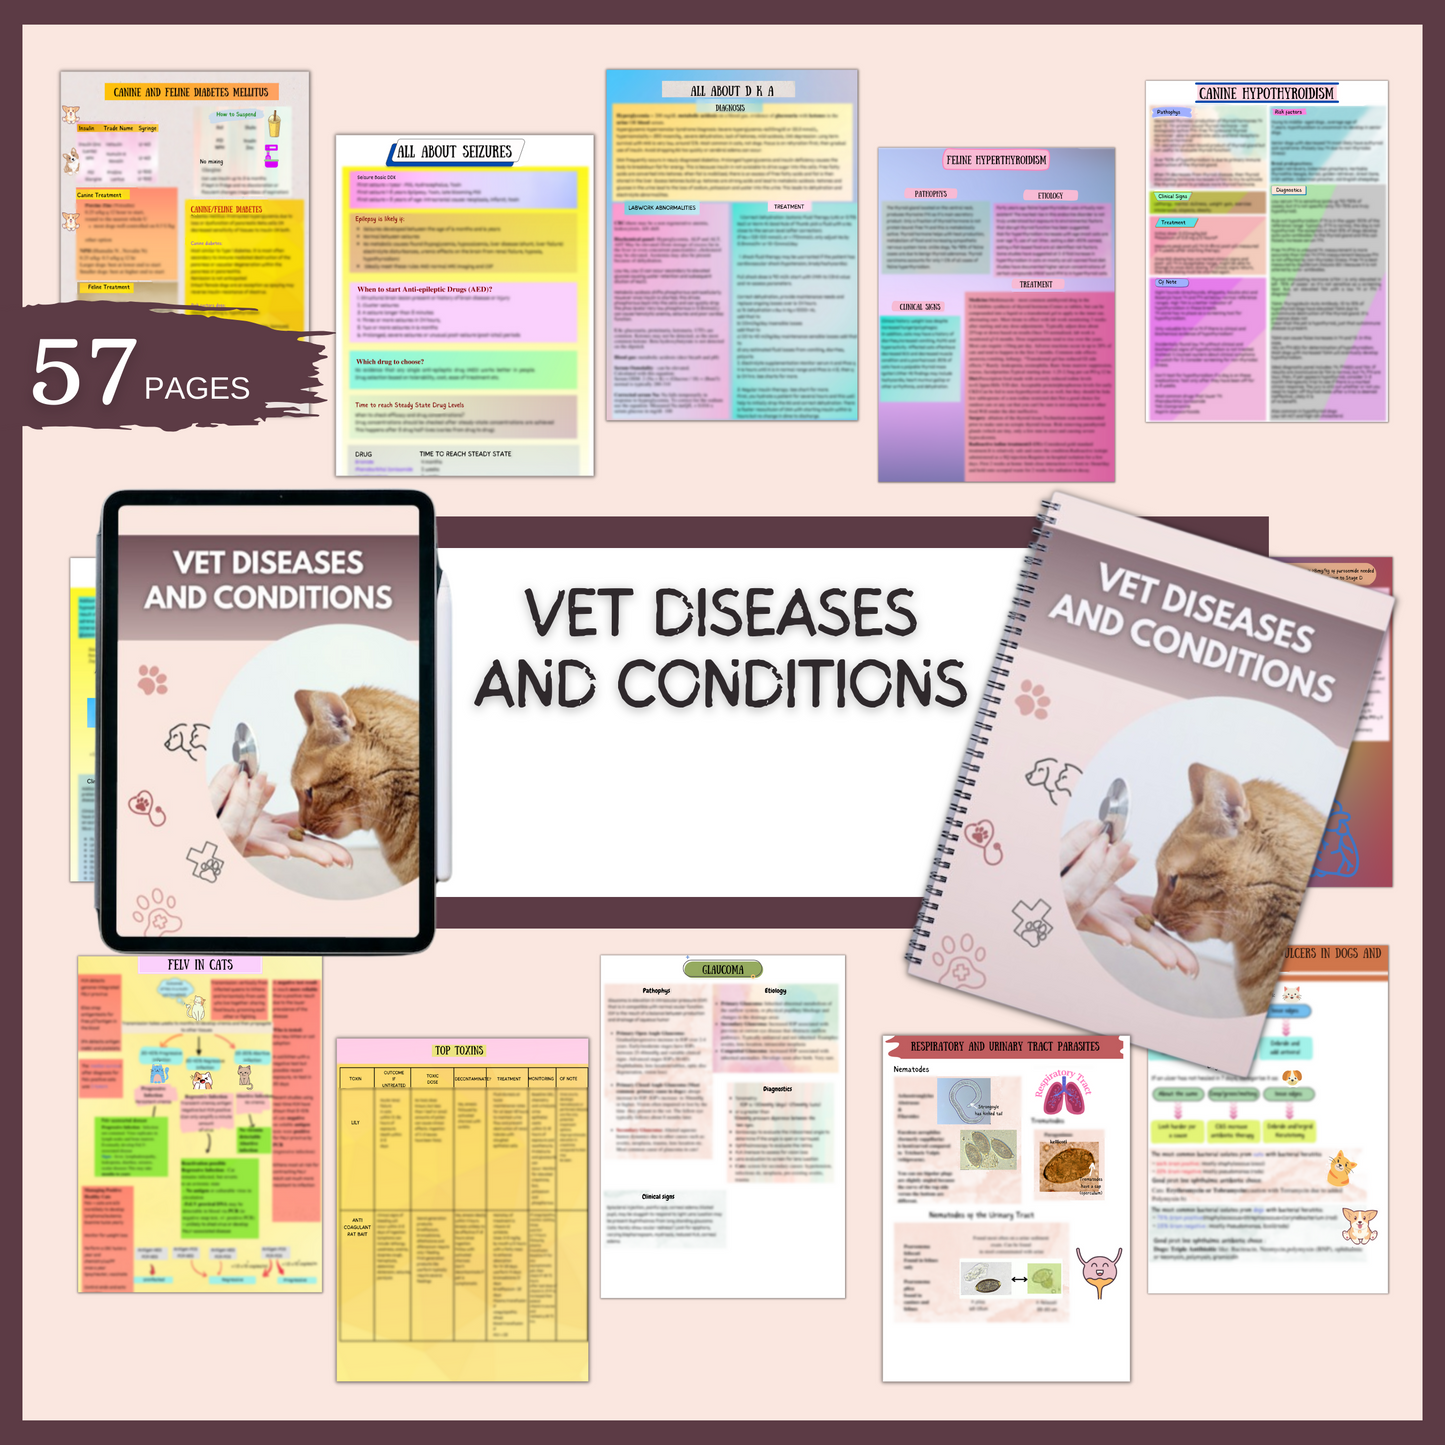 VET diseases and Conditions|57 Pages| 14Topics